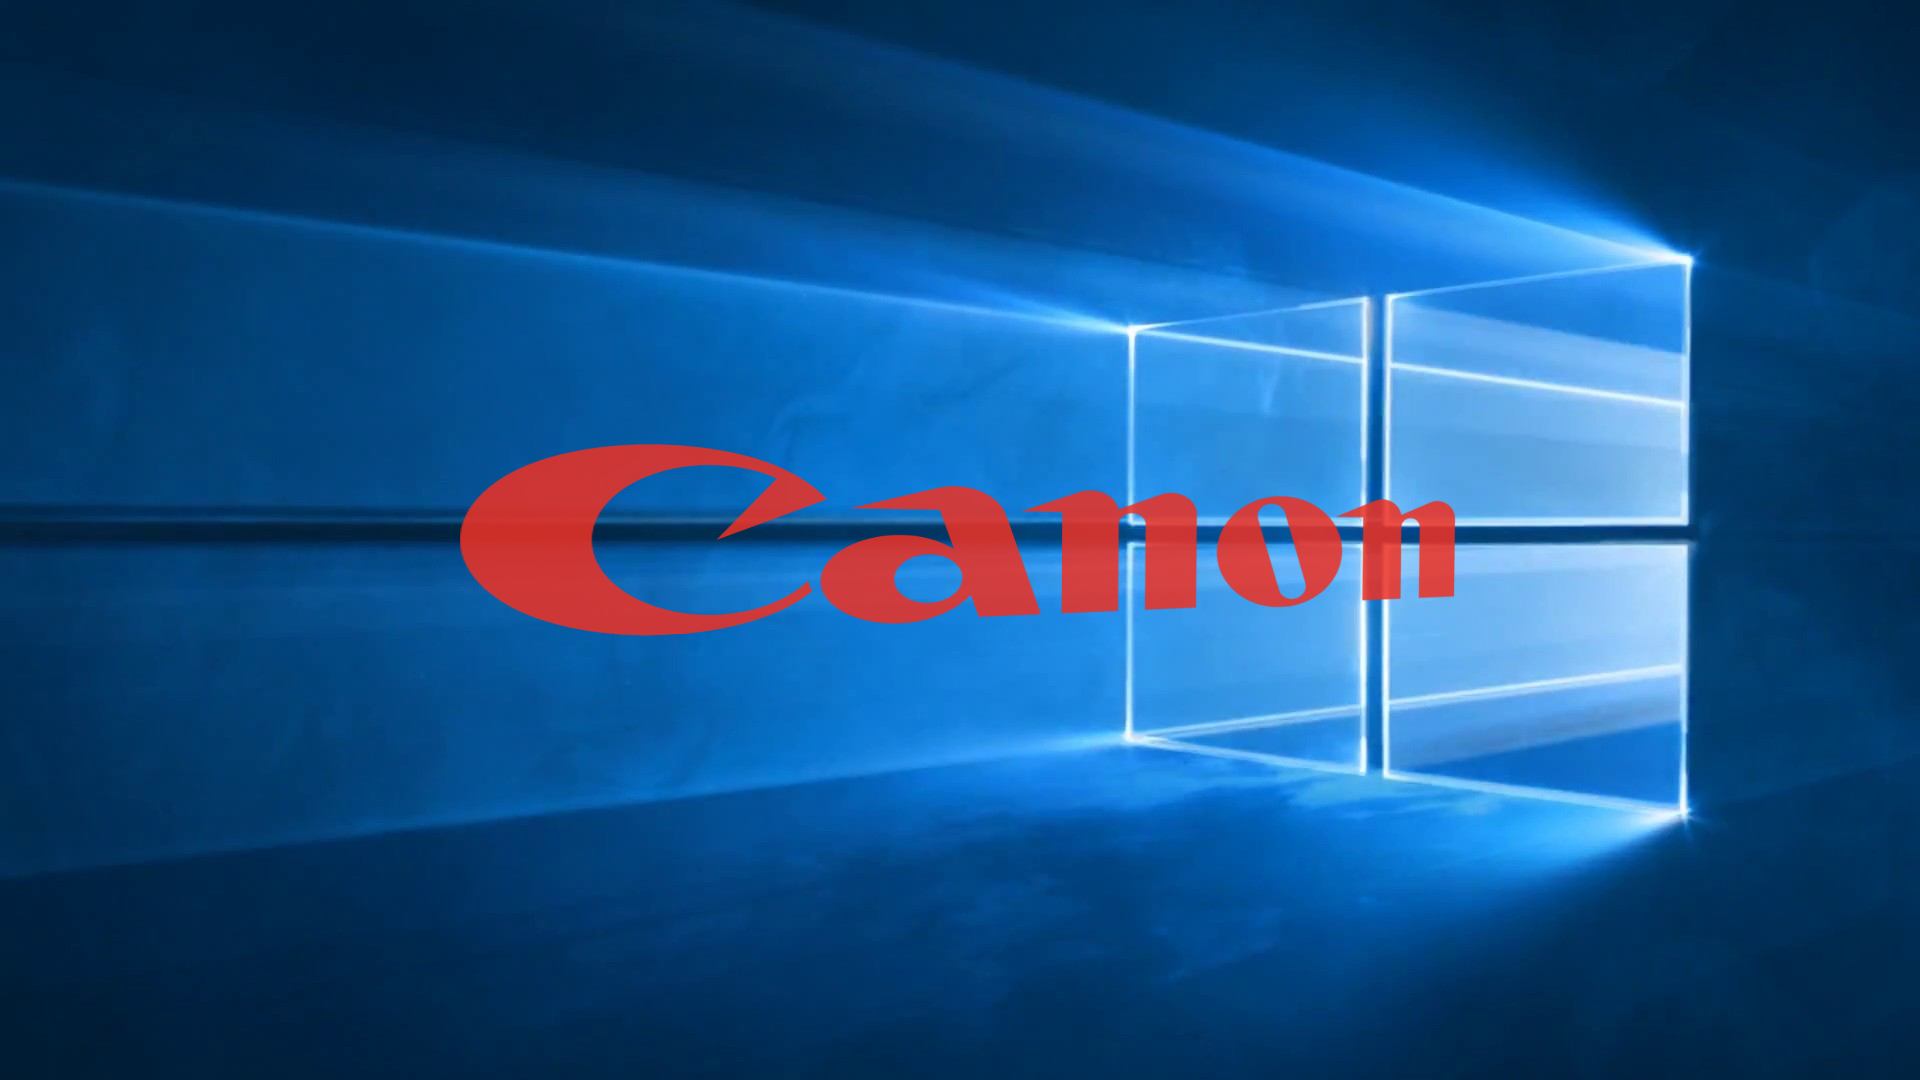 Install Canon i-SENSYS LBP710Cx Printer Driver on Windows 10 - Featured